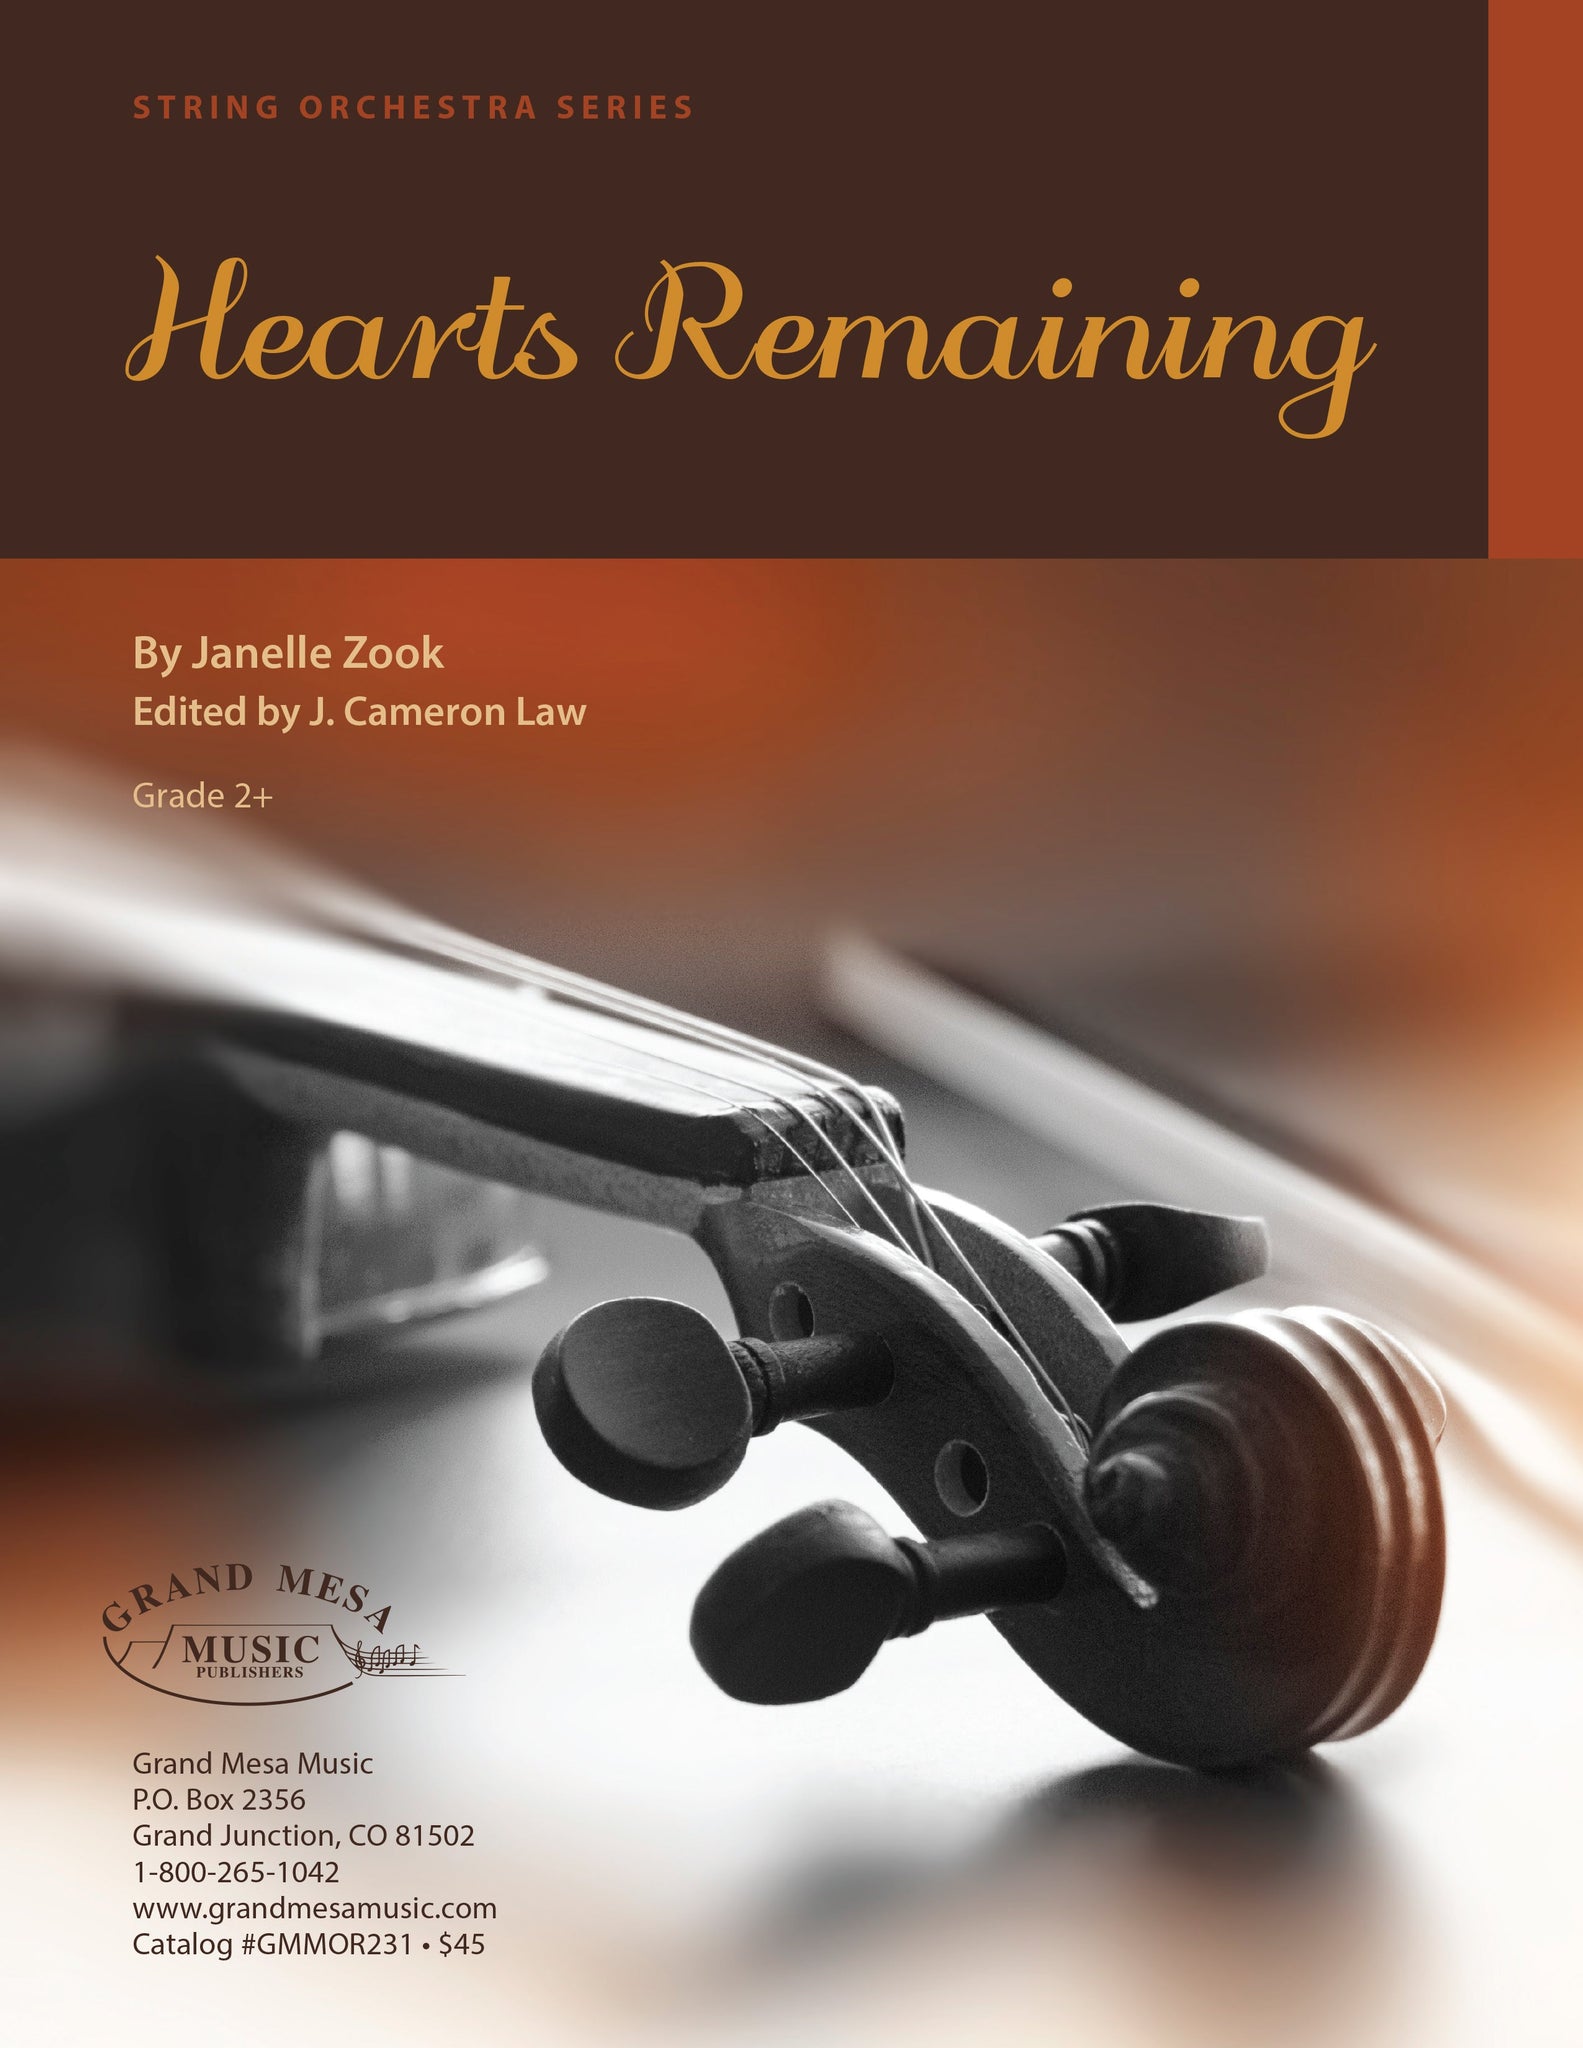 Strings sheet music cover of Hearts Remaining, composed by Janelle Zook Cunalata.